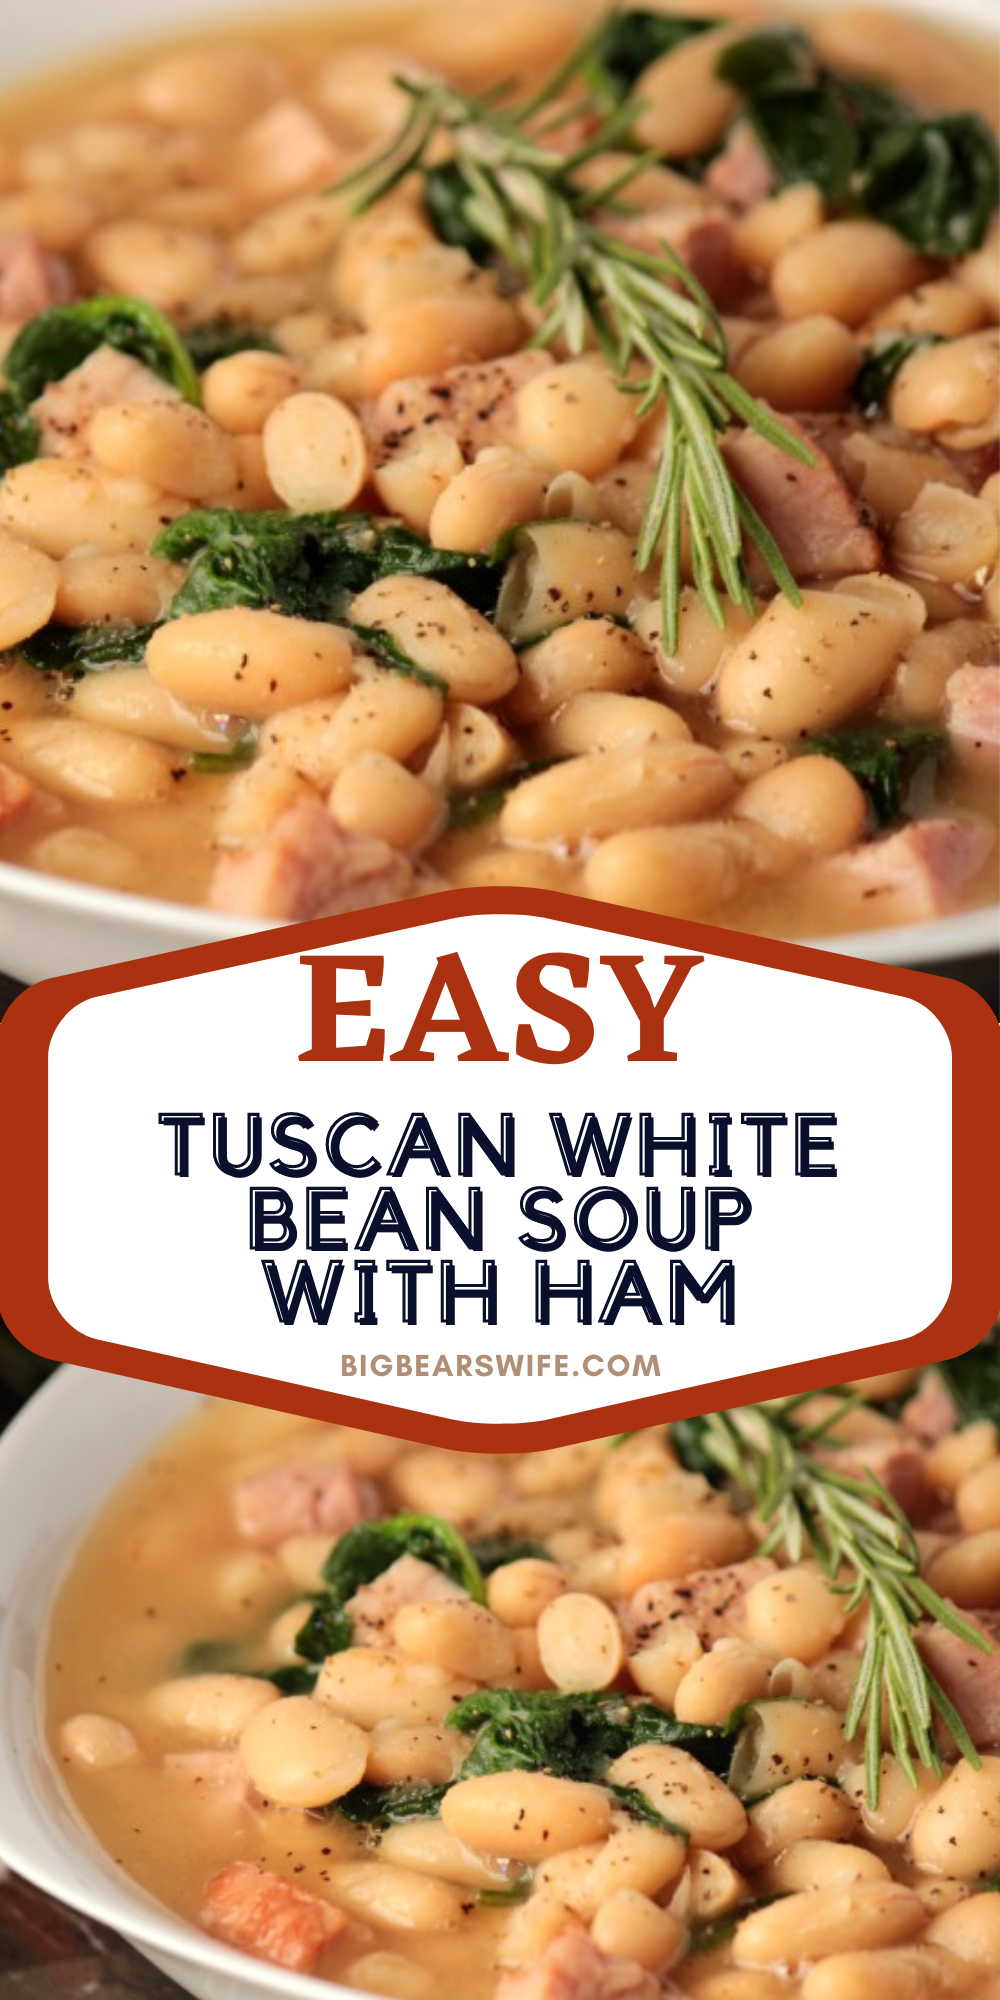 This Tuscan White Bean Soup with Ham is packed full of  Cannellini white beans and ham! It's an easy soup that's ready in under 45 minutes. This would be great with leftover ham from Thanksgiving or leftover turkey!  via @bigbearswife